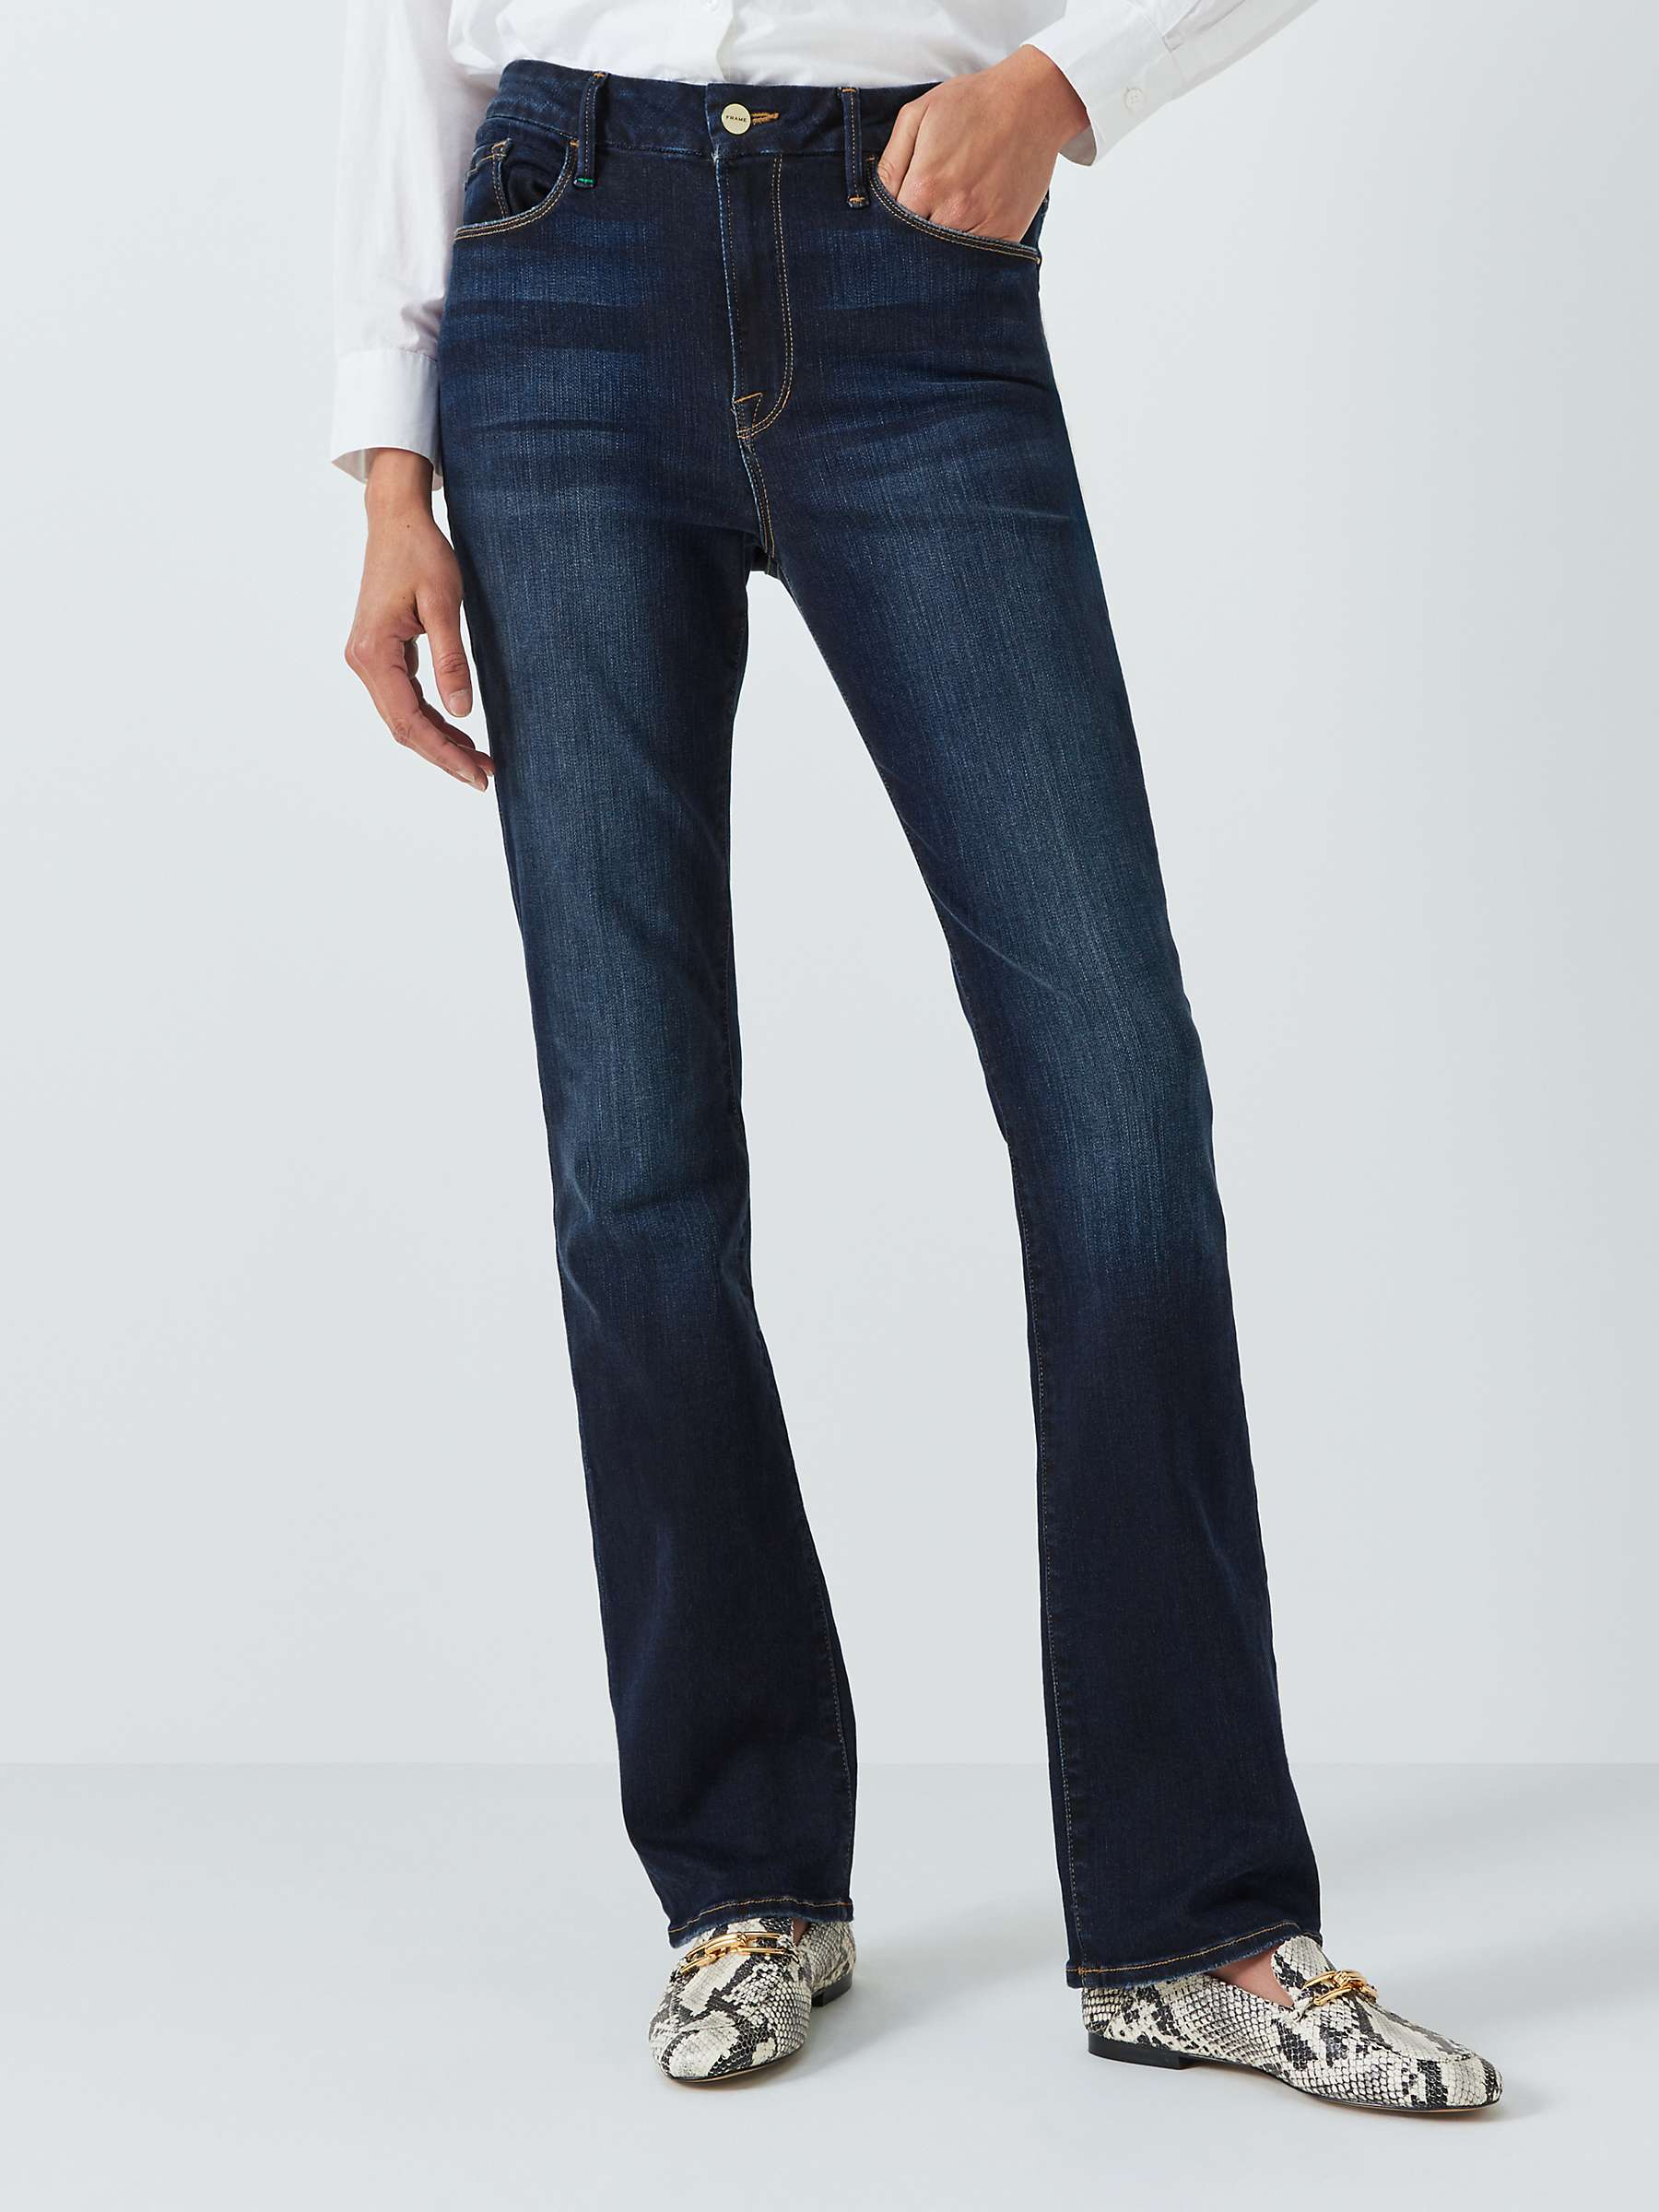 Buy FRAME Le Mini Bootcut Jeans, Navy Online at johnlewis.com